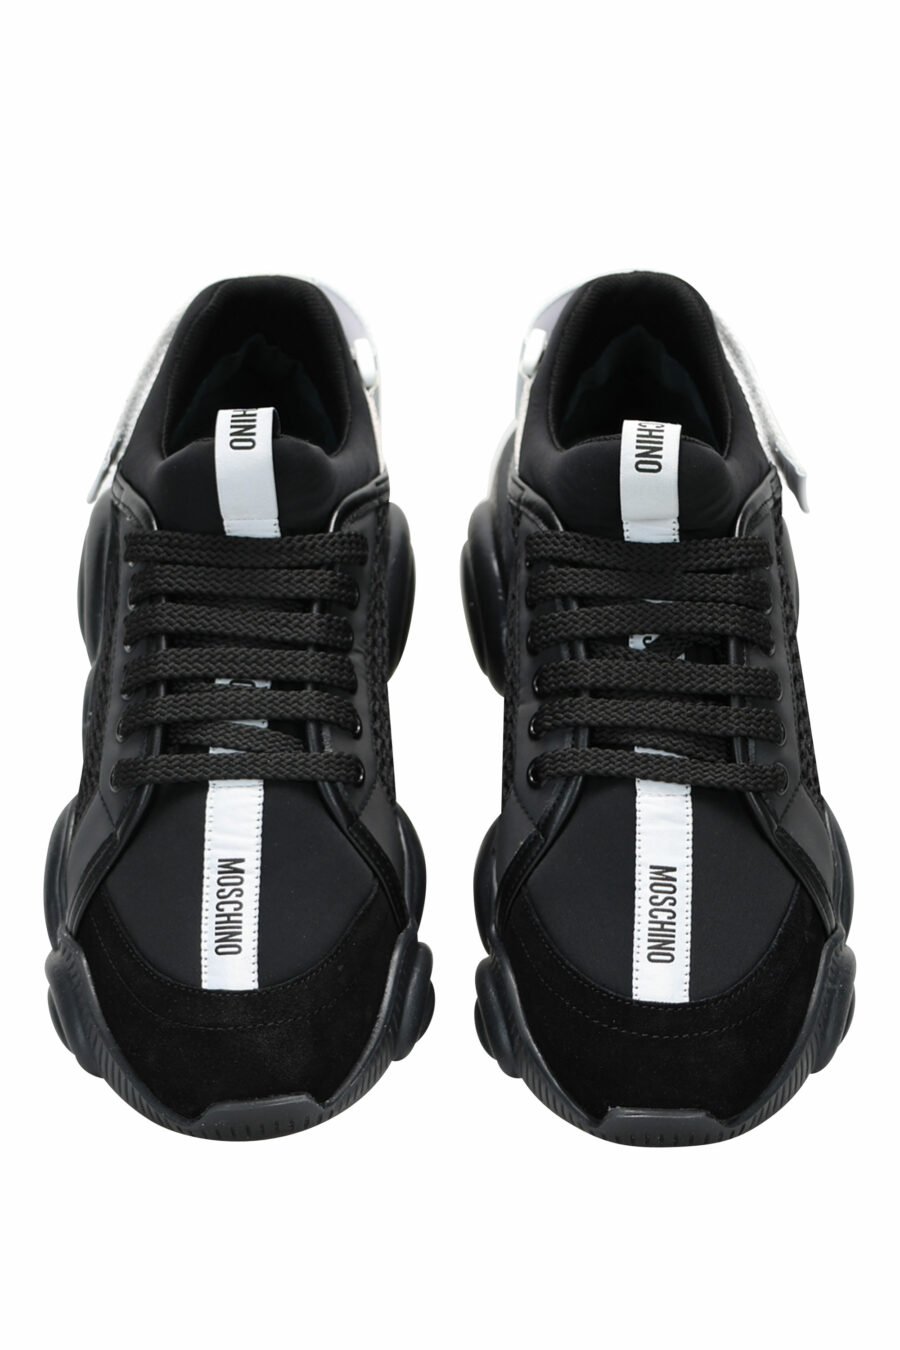 Black "teddy" trainers with black sole and white velcro logo - 8054653062856 4